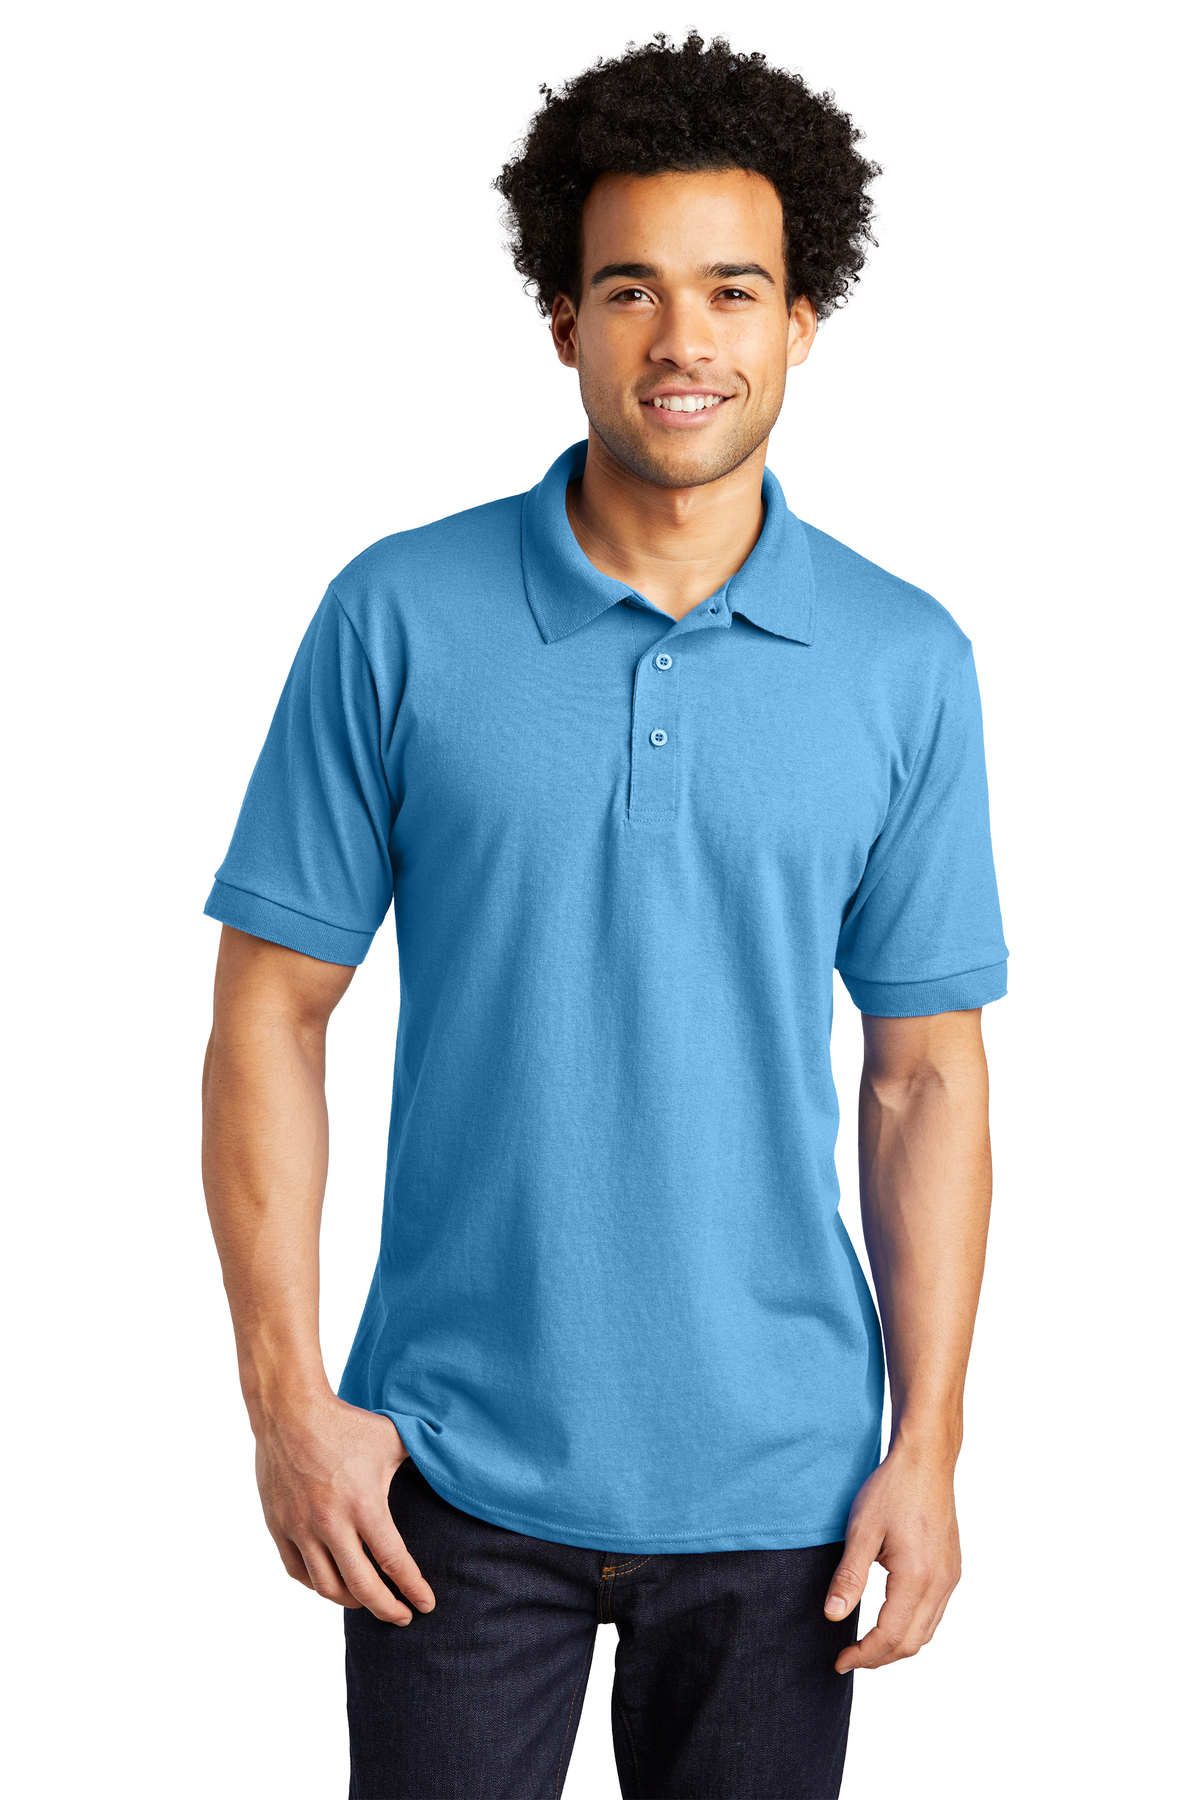 Port & Company Tall Core Blend Jersey Knit Polo KP55T 